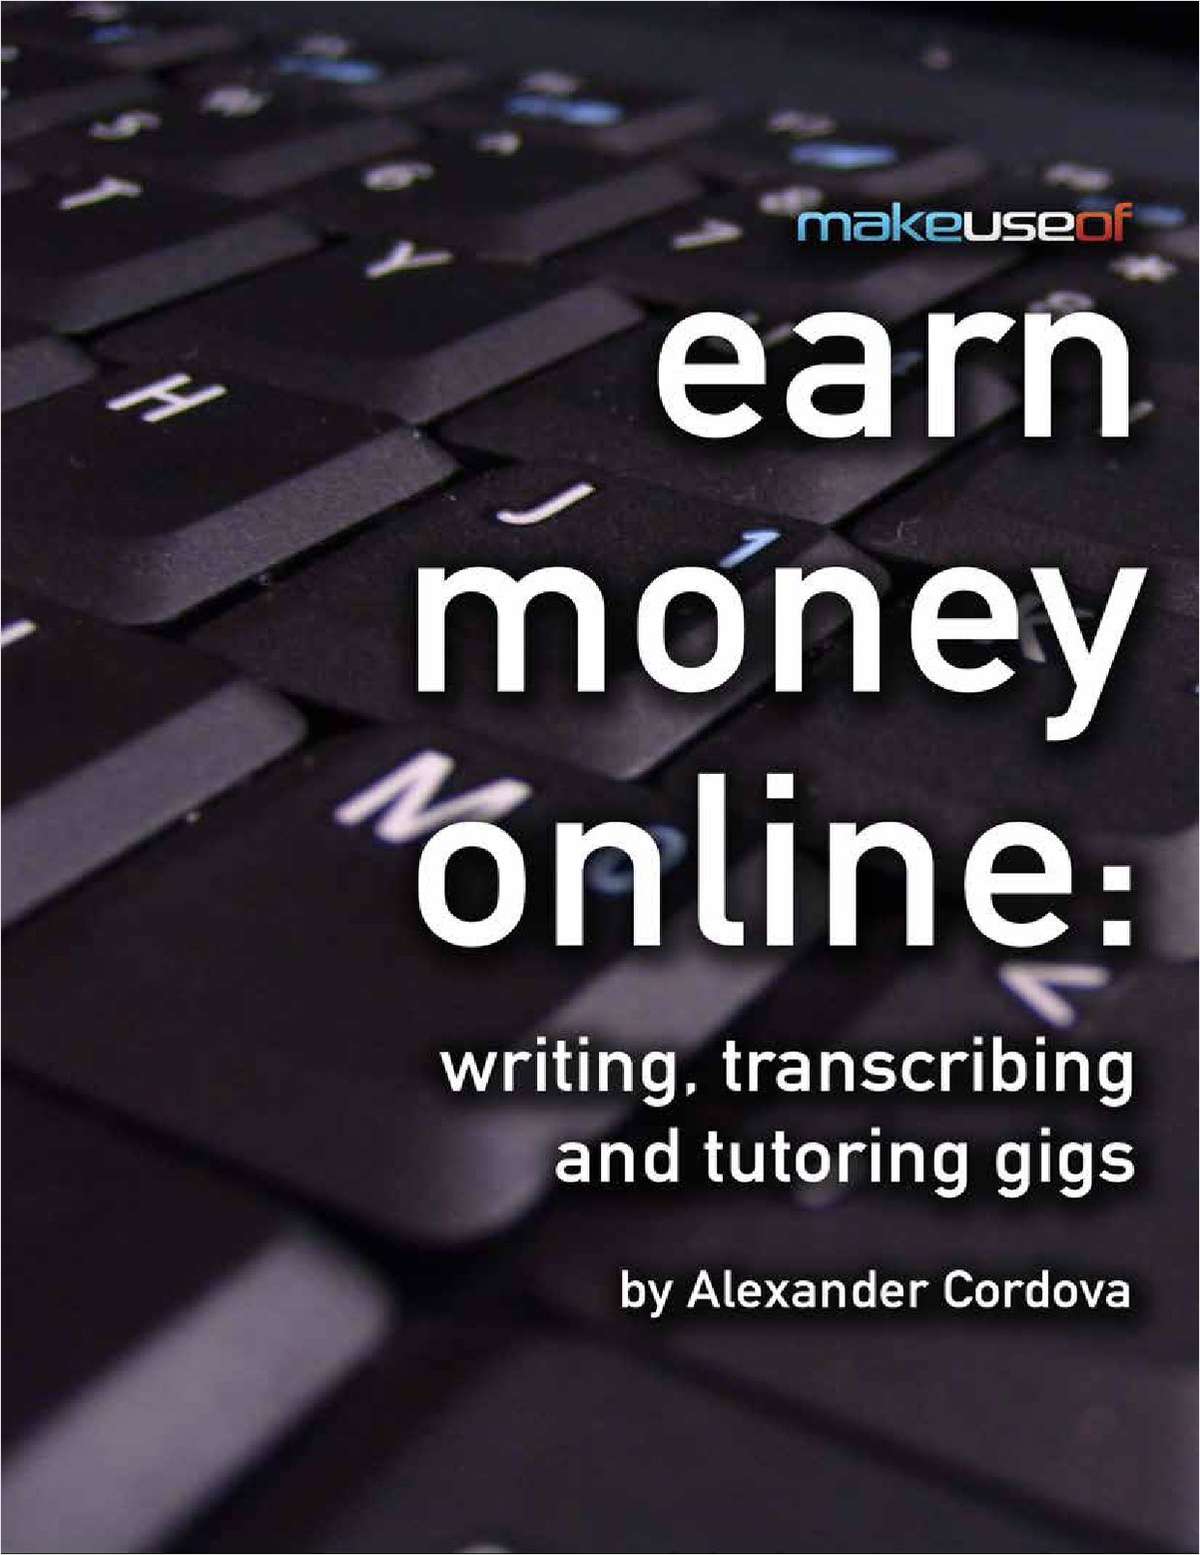 Earn Money Online: writing, transcribing and tutoring gigs